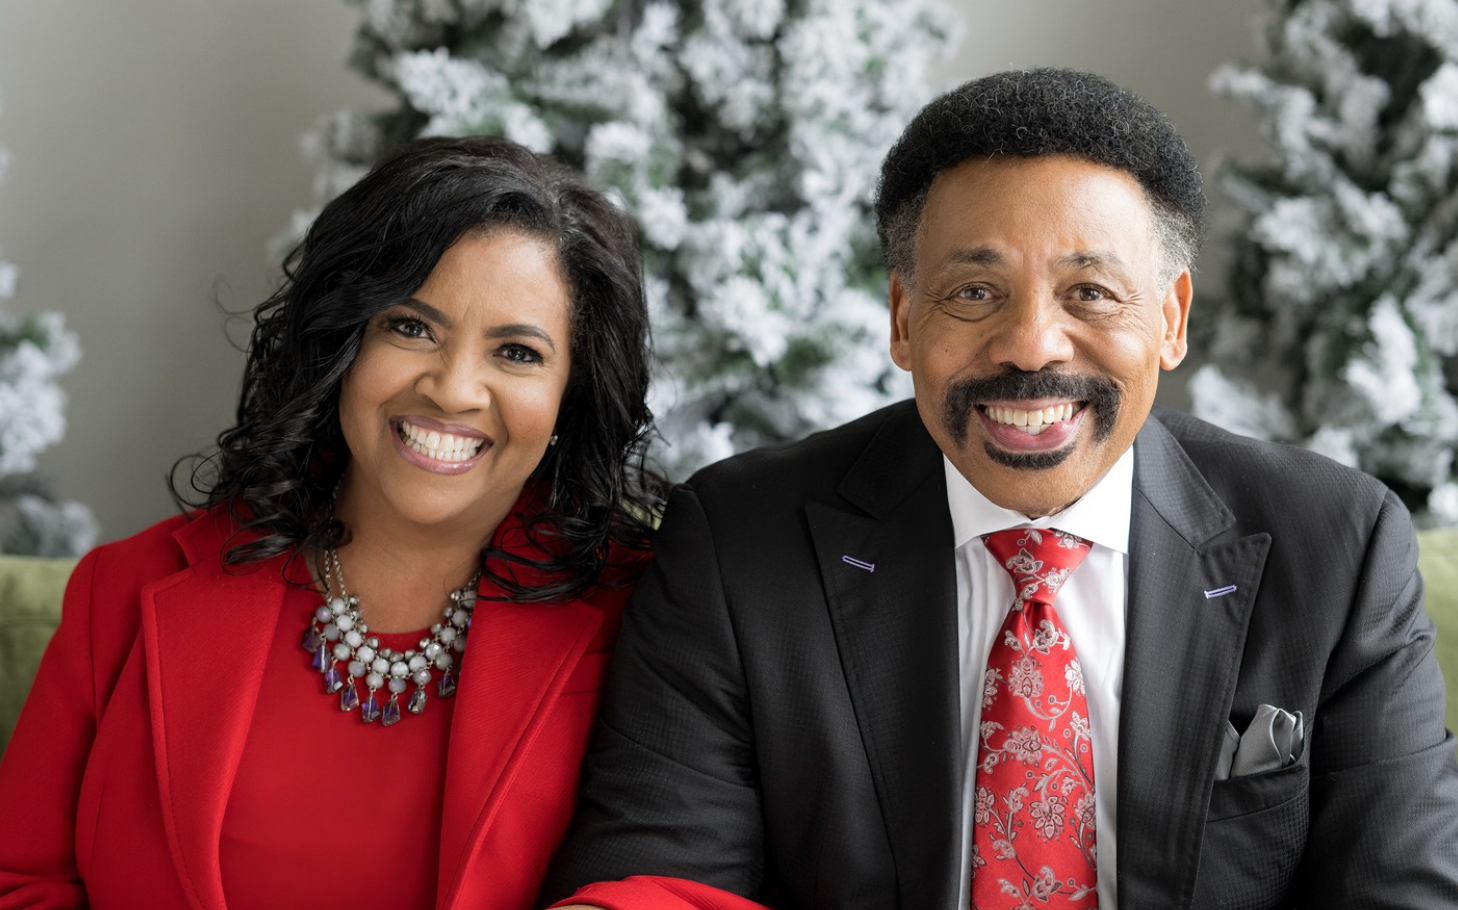 Dr. Tony Evans and Dr. Carla are married